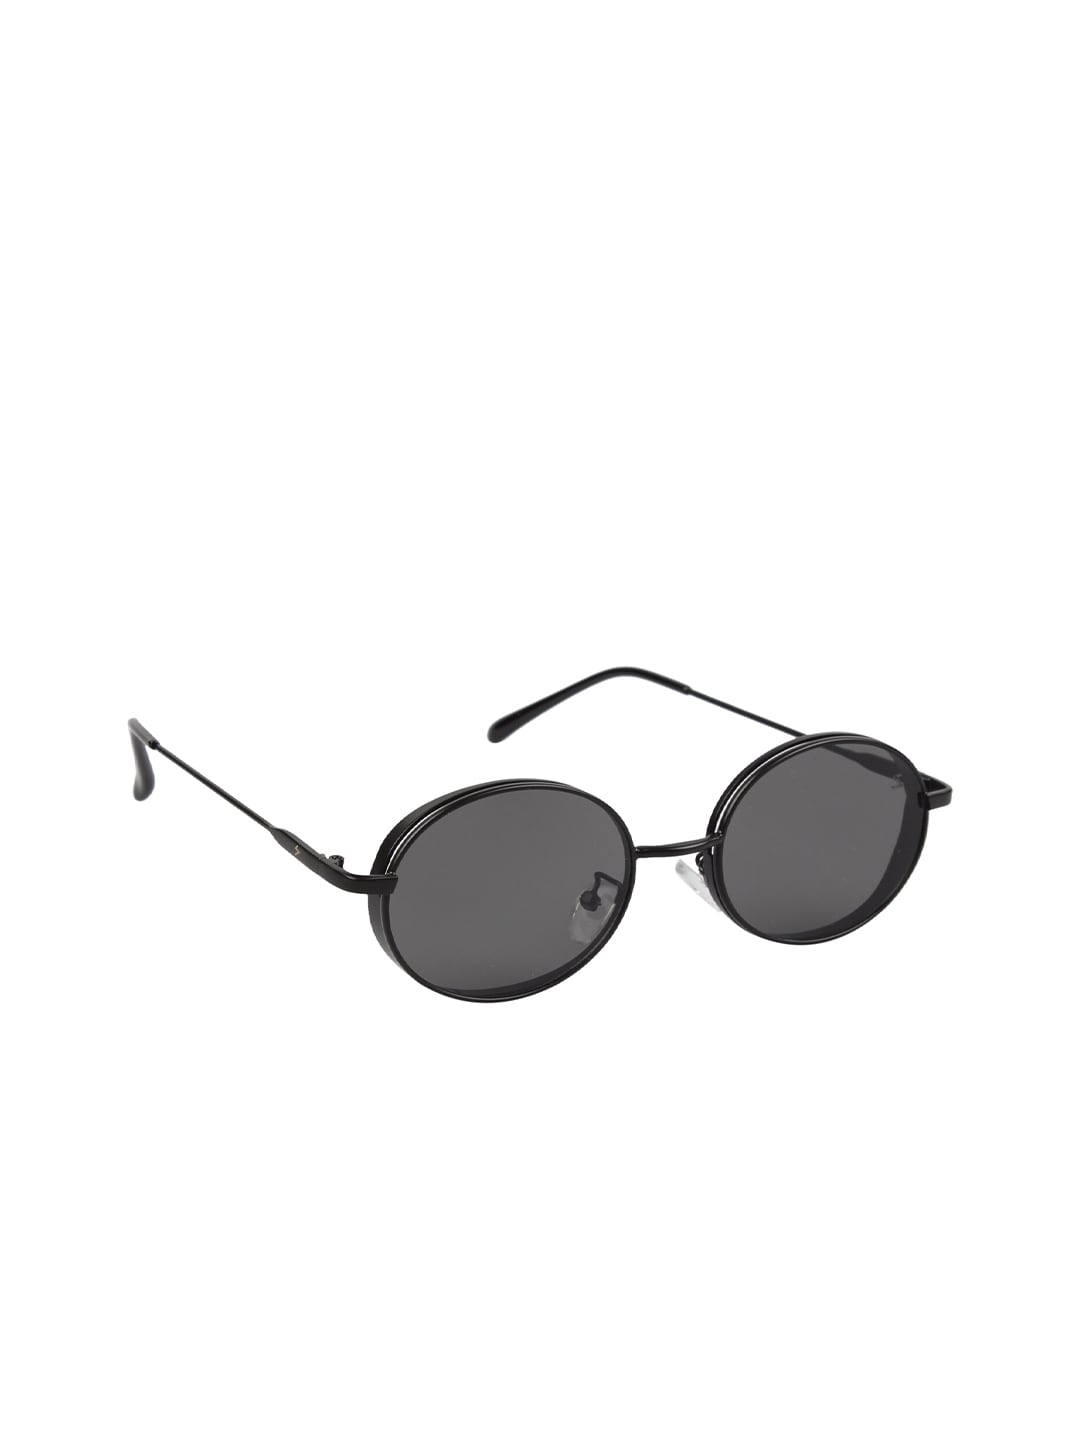 Scavin Unisex Grey Lens & Black Round Sunglasses with UV Protected Lens Price in India